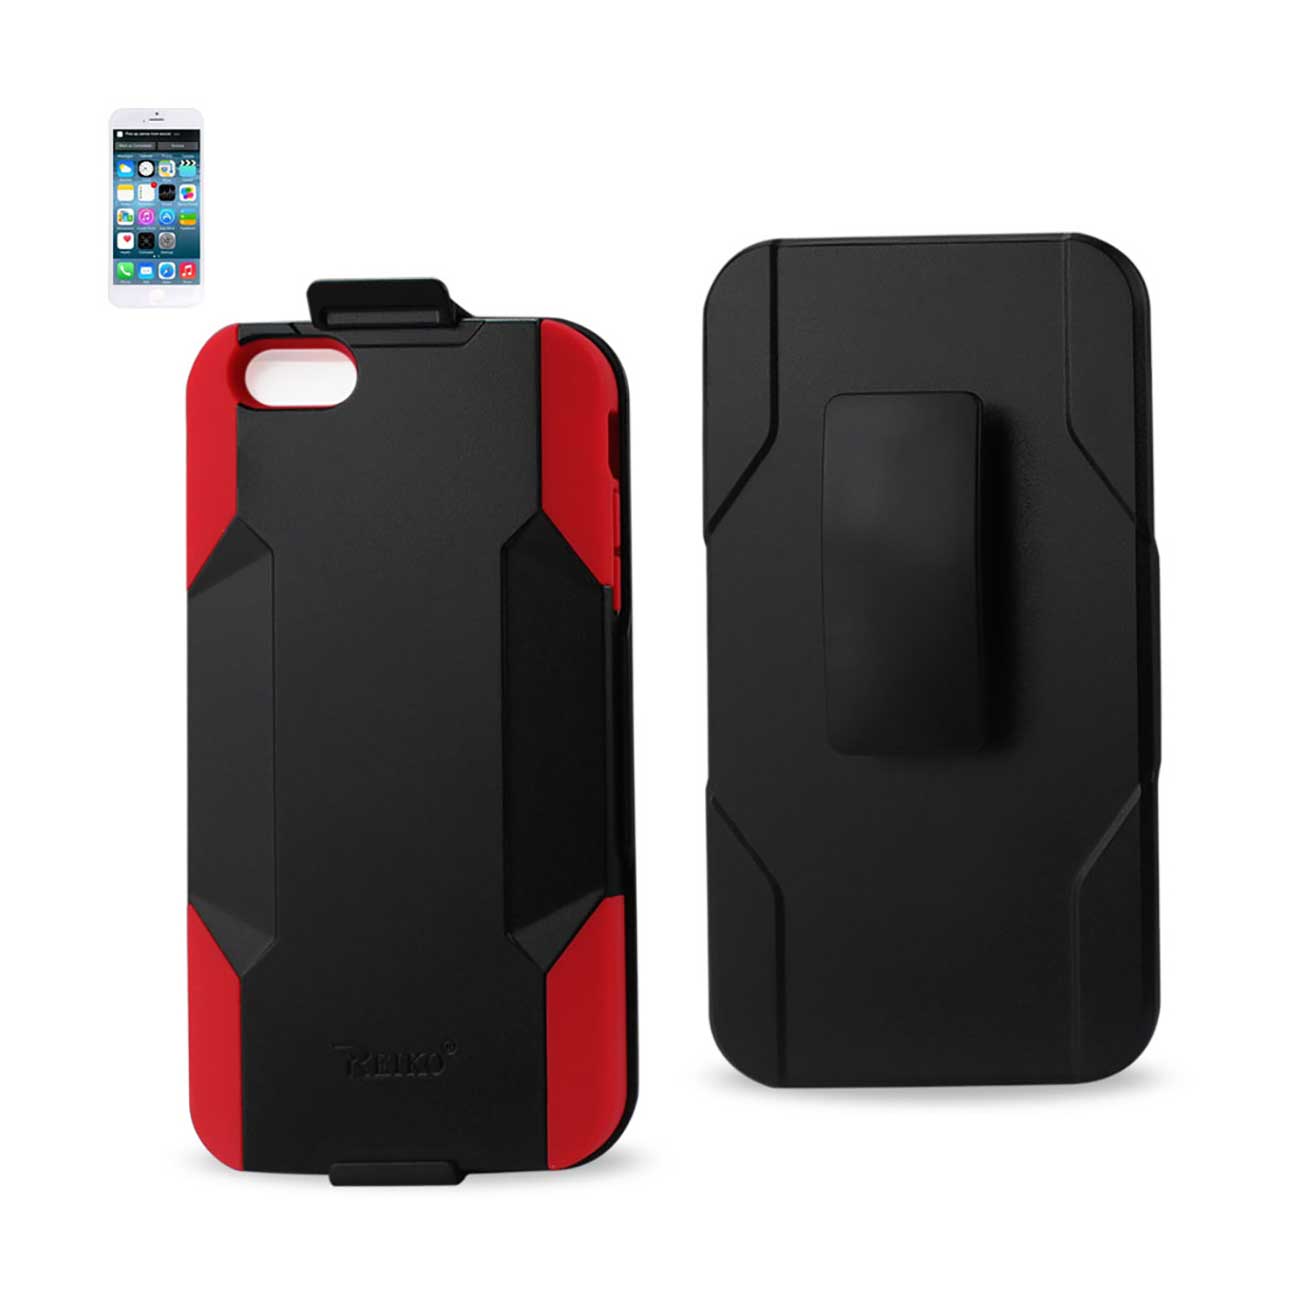 Case Holster Combo Hybrid Heavy Duty 3-In-1 iPhone 6 Plus Red Black Color